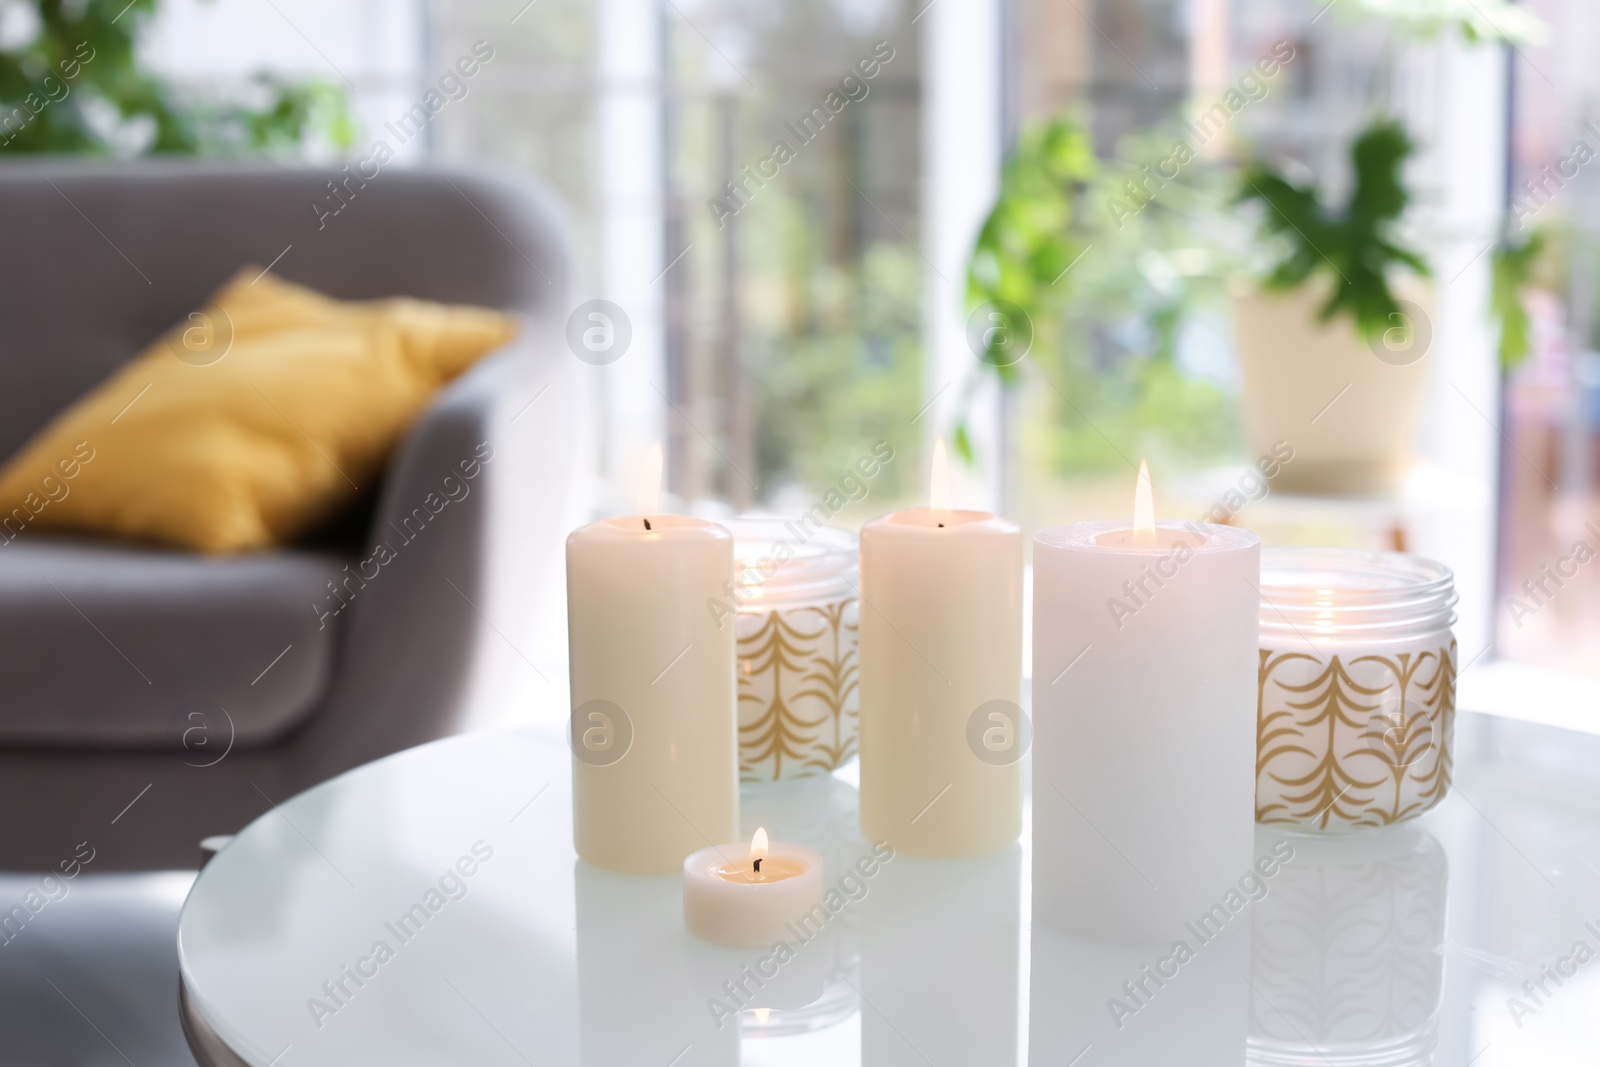 Photo of Burning candles on table indoors. Interior decor element